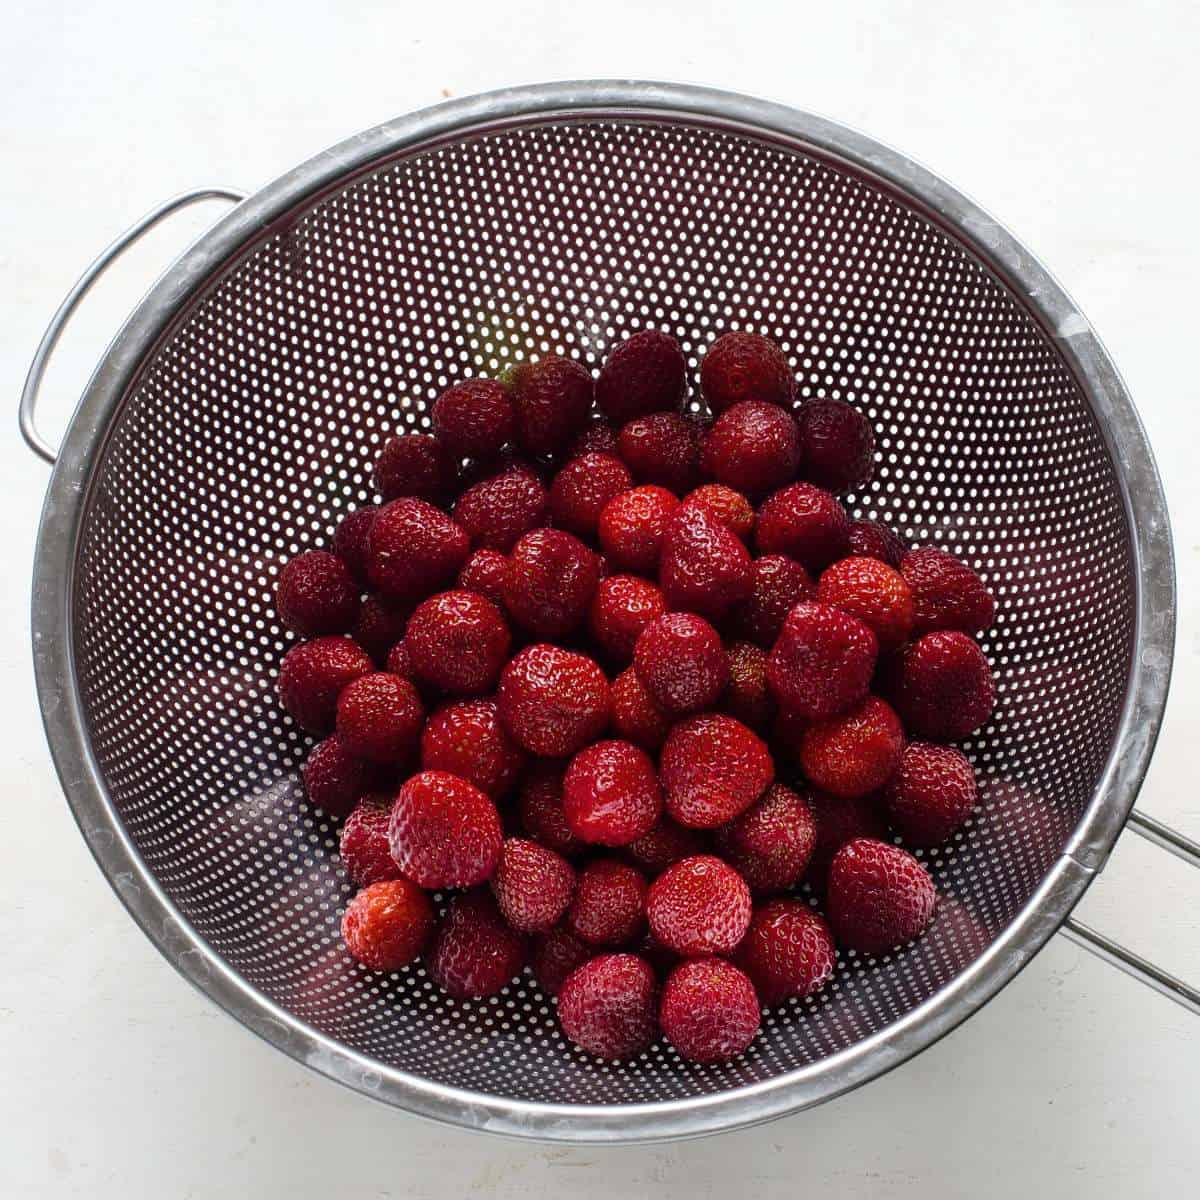 Rinsed and drain strawberries in a colander.